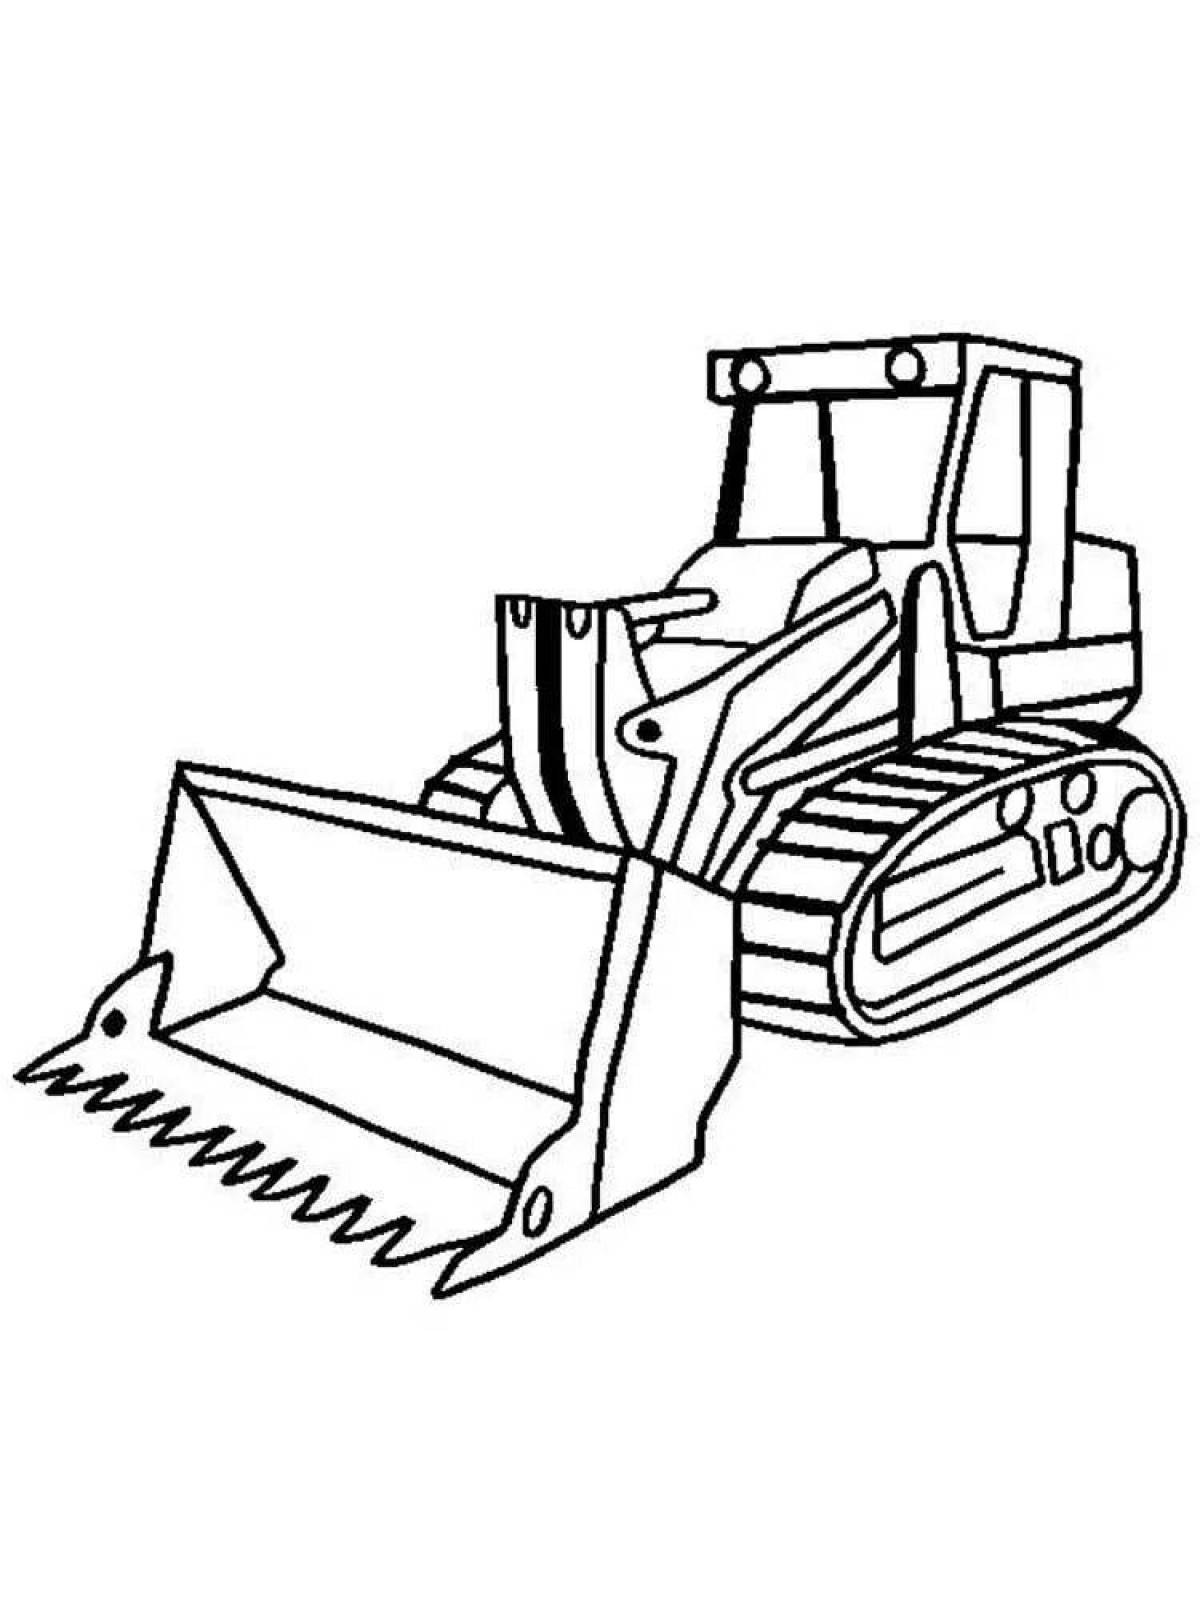 Sweet bulldozer coloring book for kids